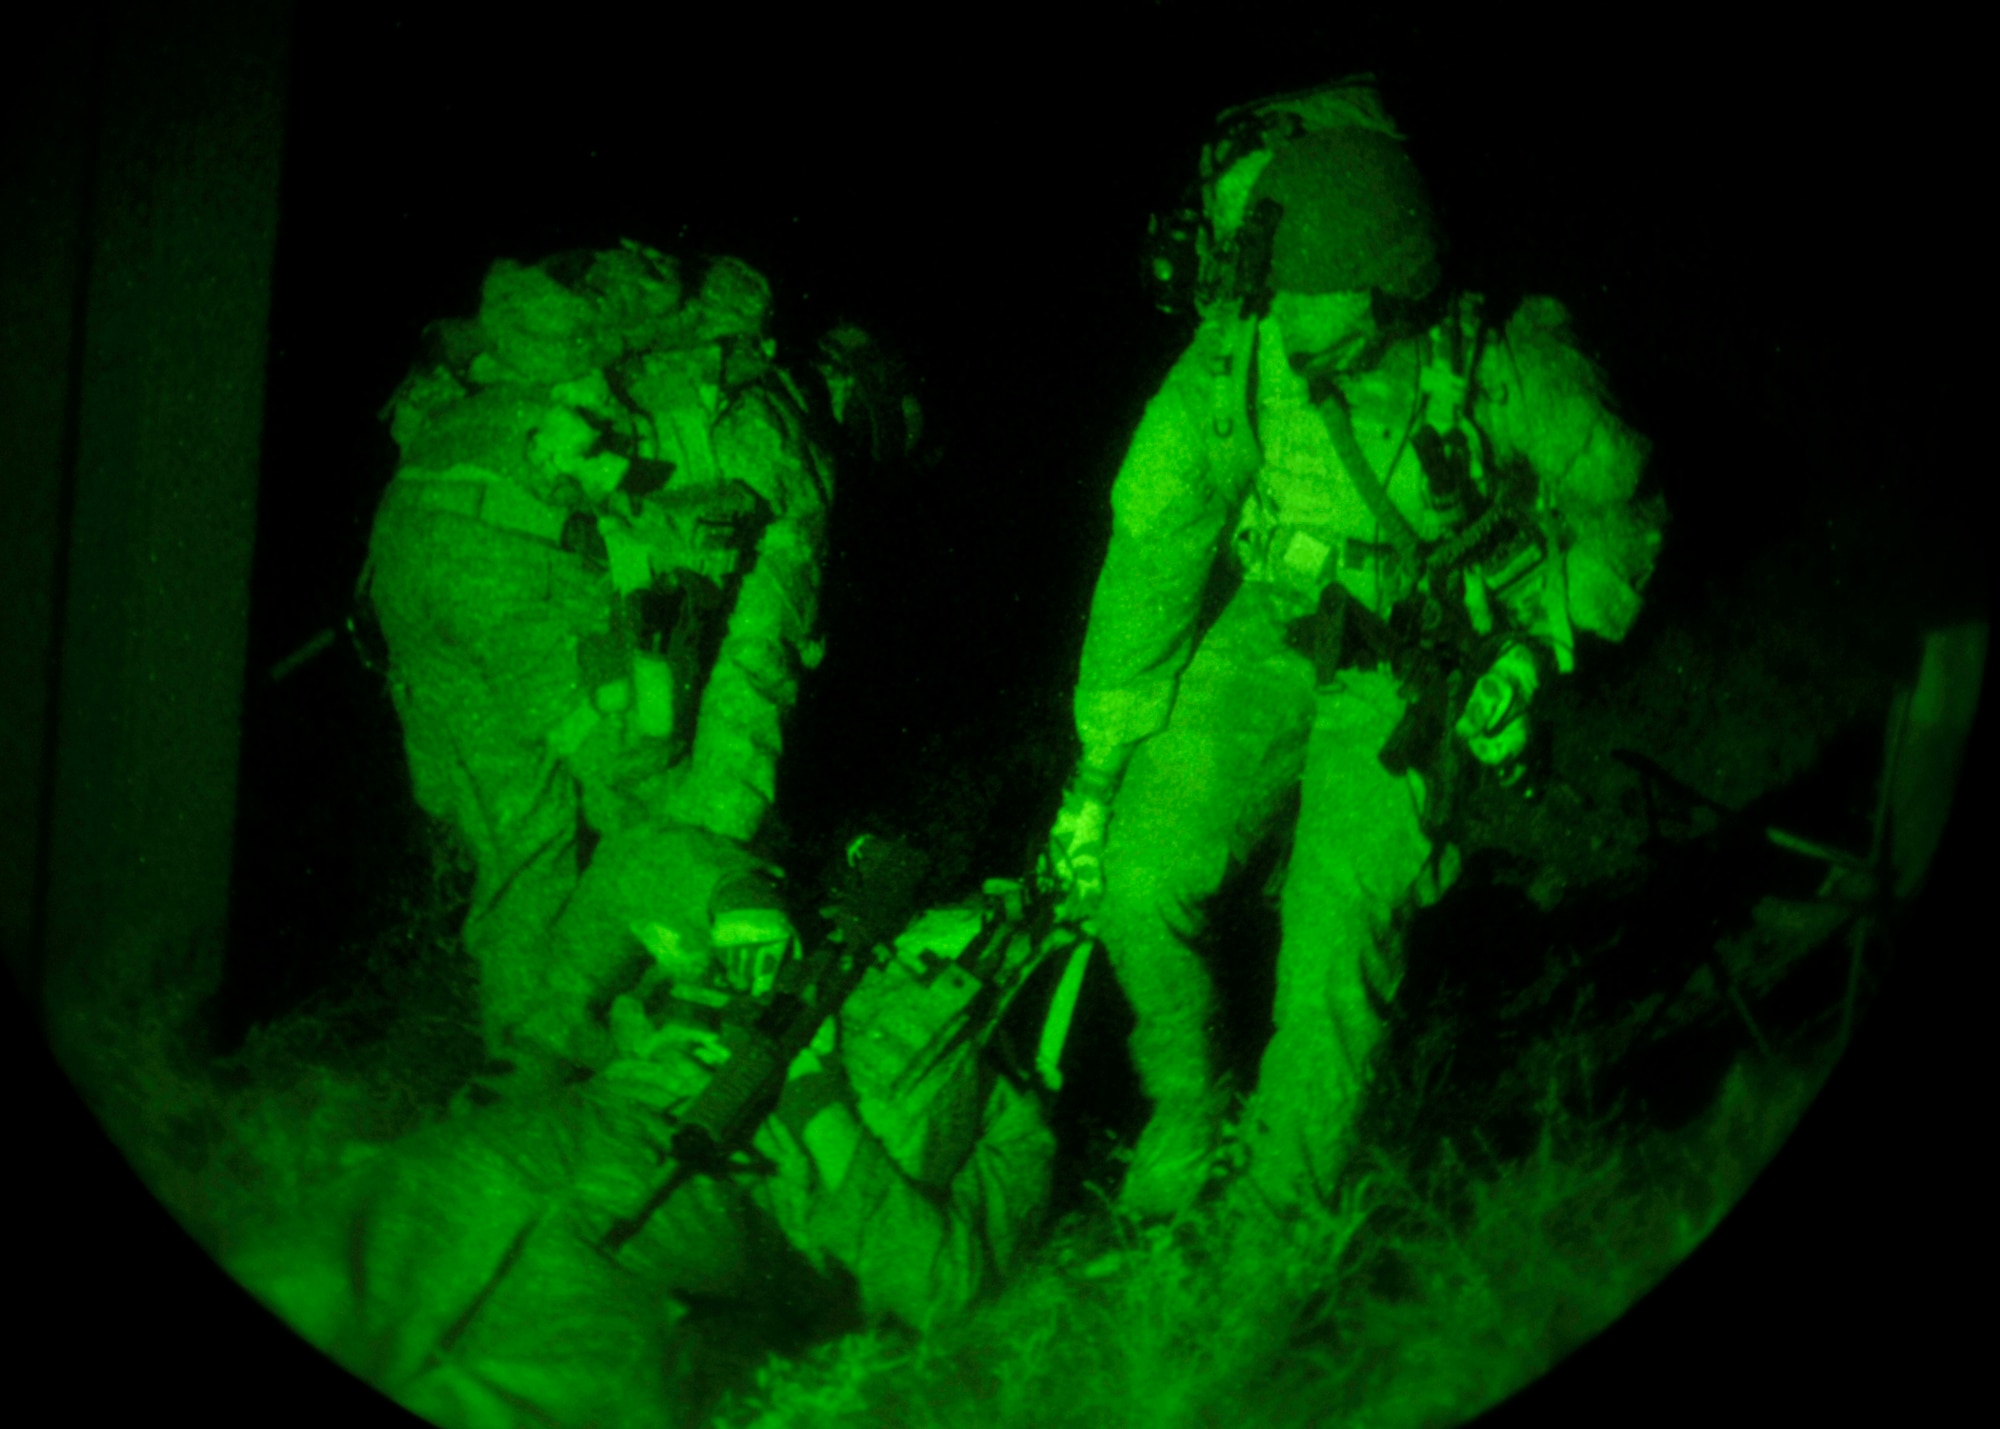 U.S. soldiers with the 3rd Special Forces Group, simulate dragging a wounded soldier to safety during a training exercise at Melrose Range, N.M., Sept. 20, 2011. The training consisted of several different scenarios and was designed to prepare the special operators for situations they could encounter on real world missions. (U.S. Air Force photo by Airman 1st Class Ericka Engblom/ Released) 